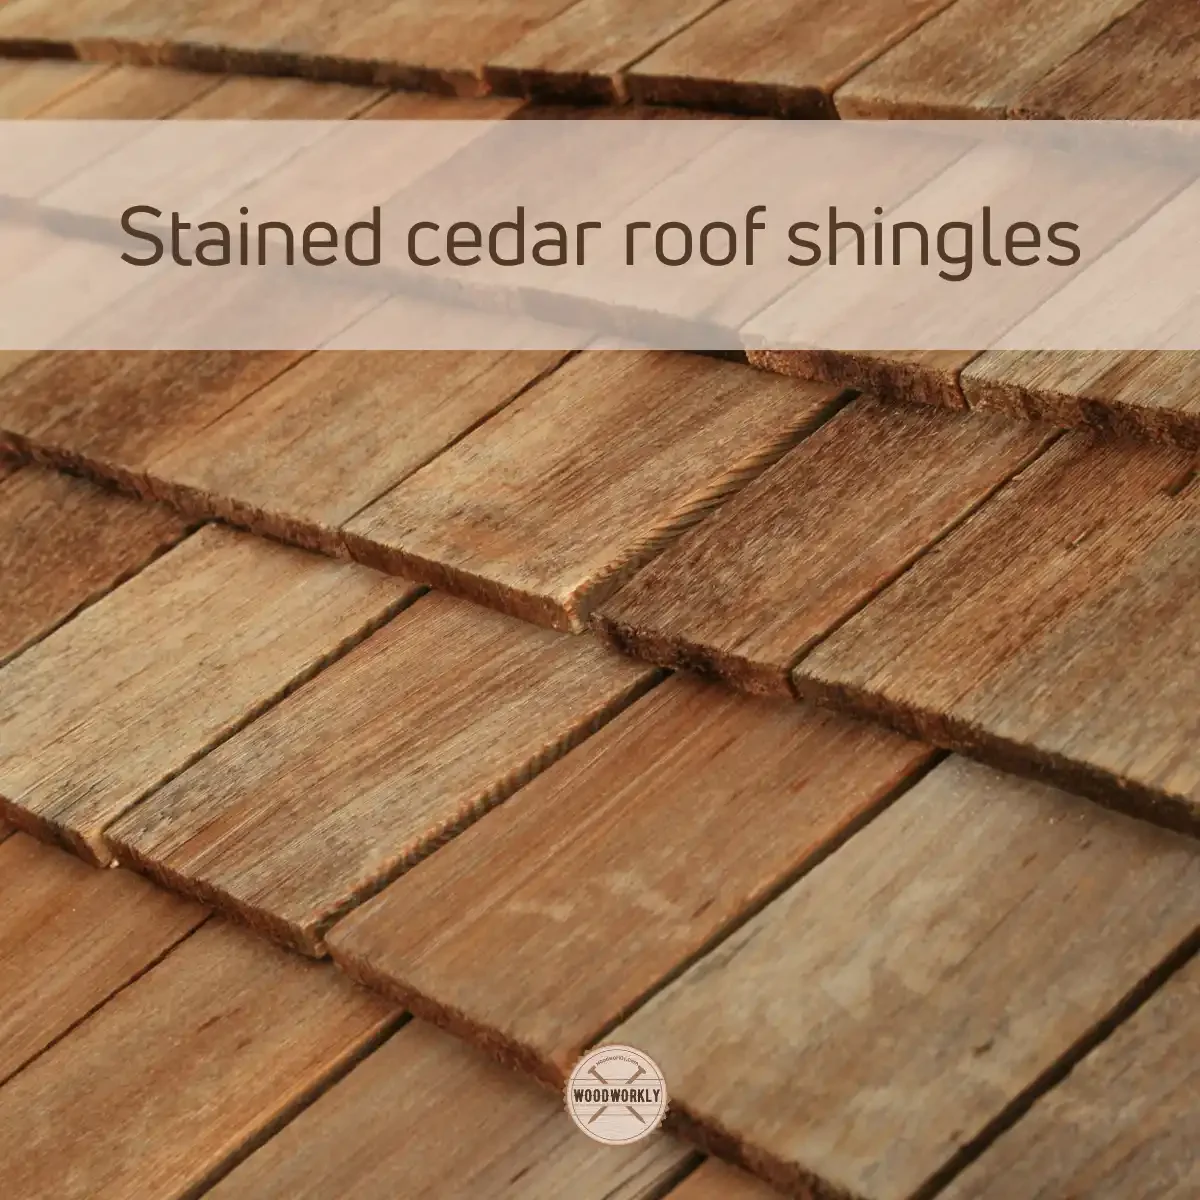 Stained cedar roof shingles